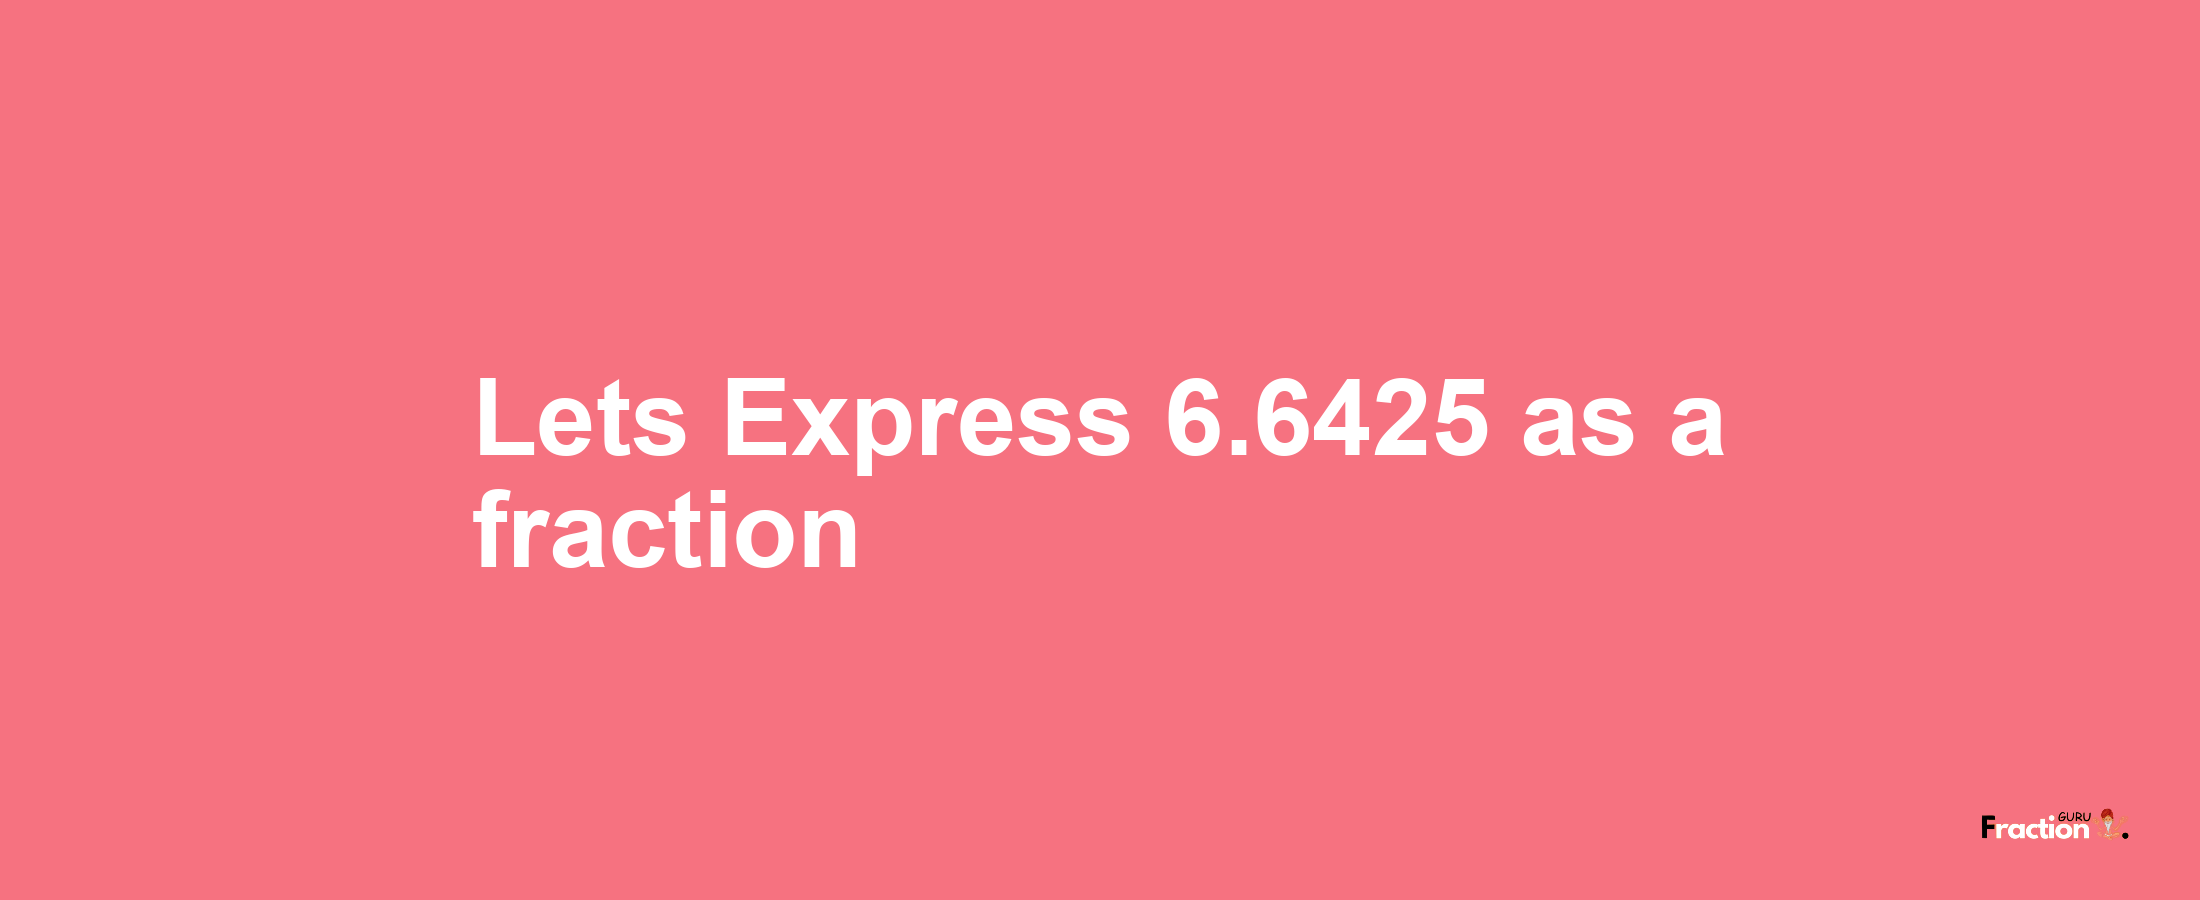 Lets Express 6.6425 as afraction